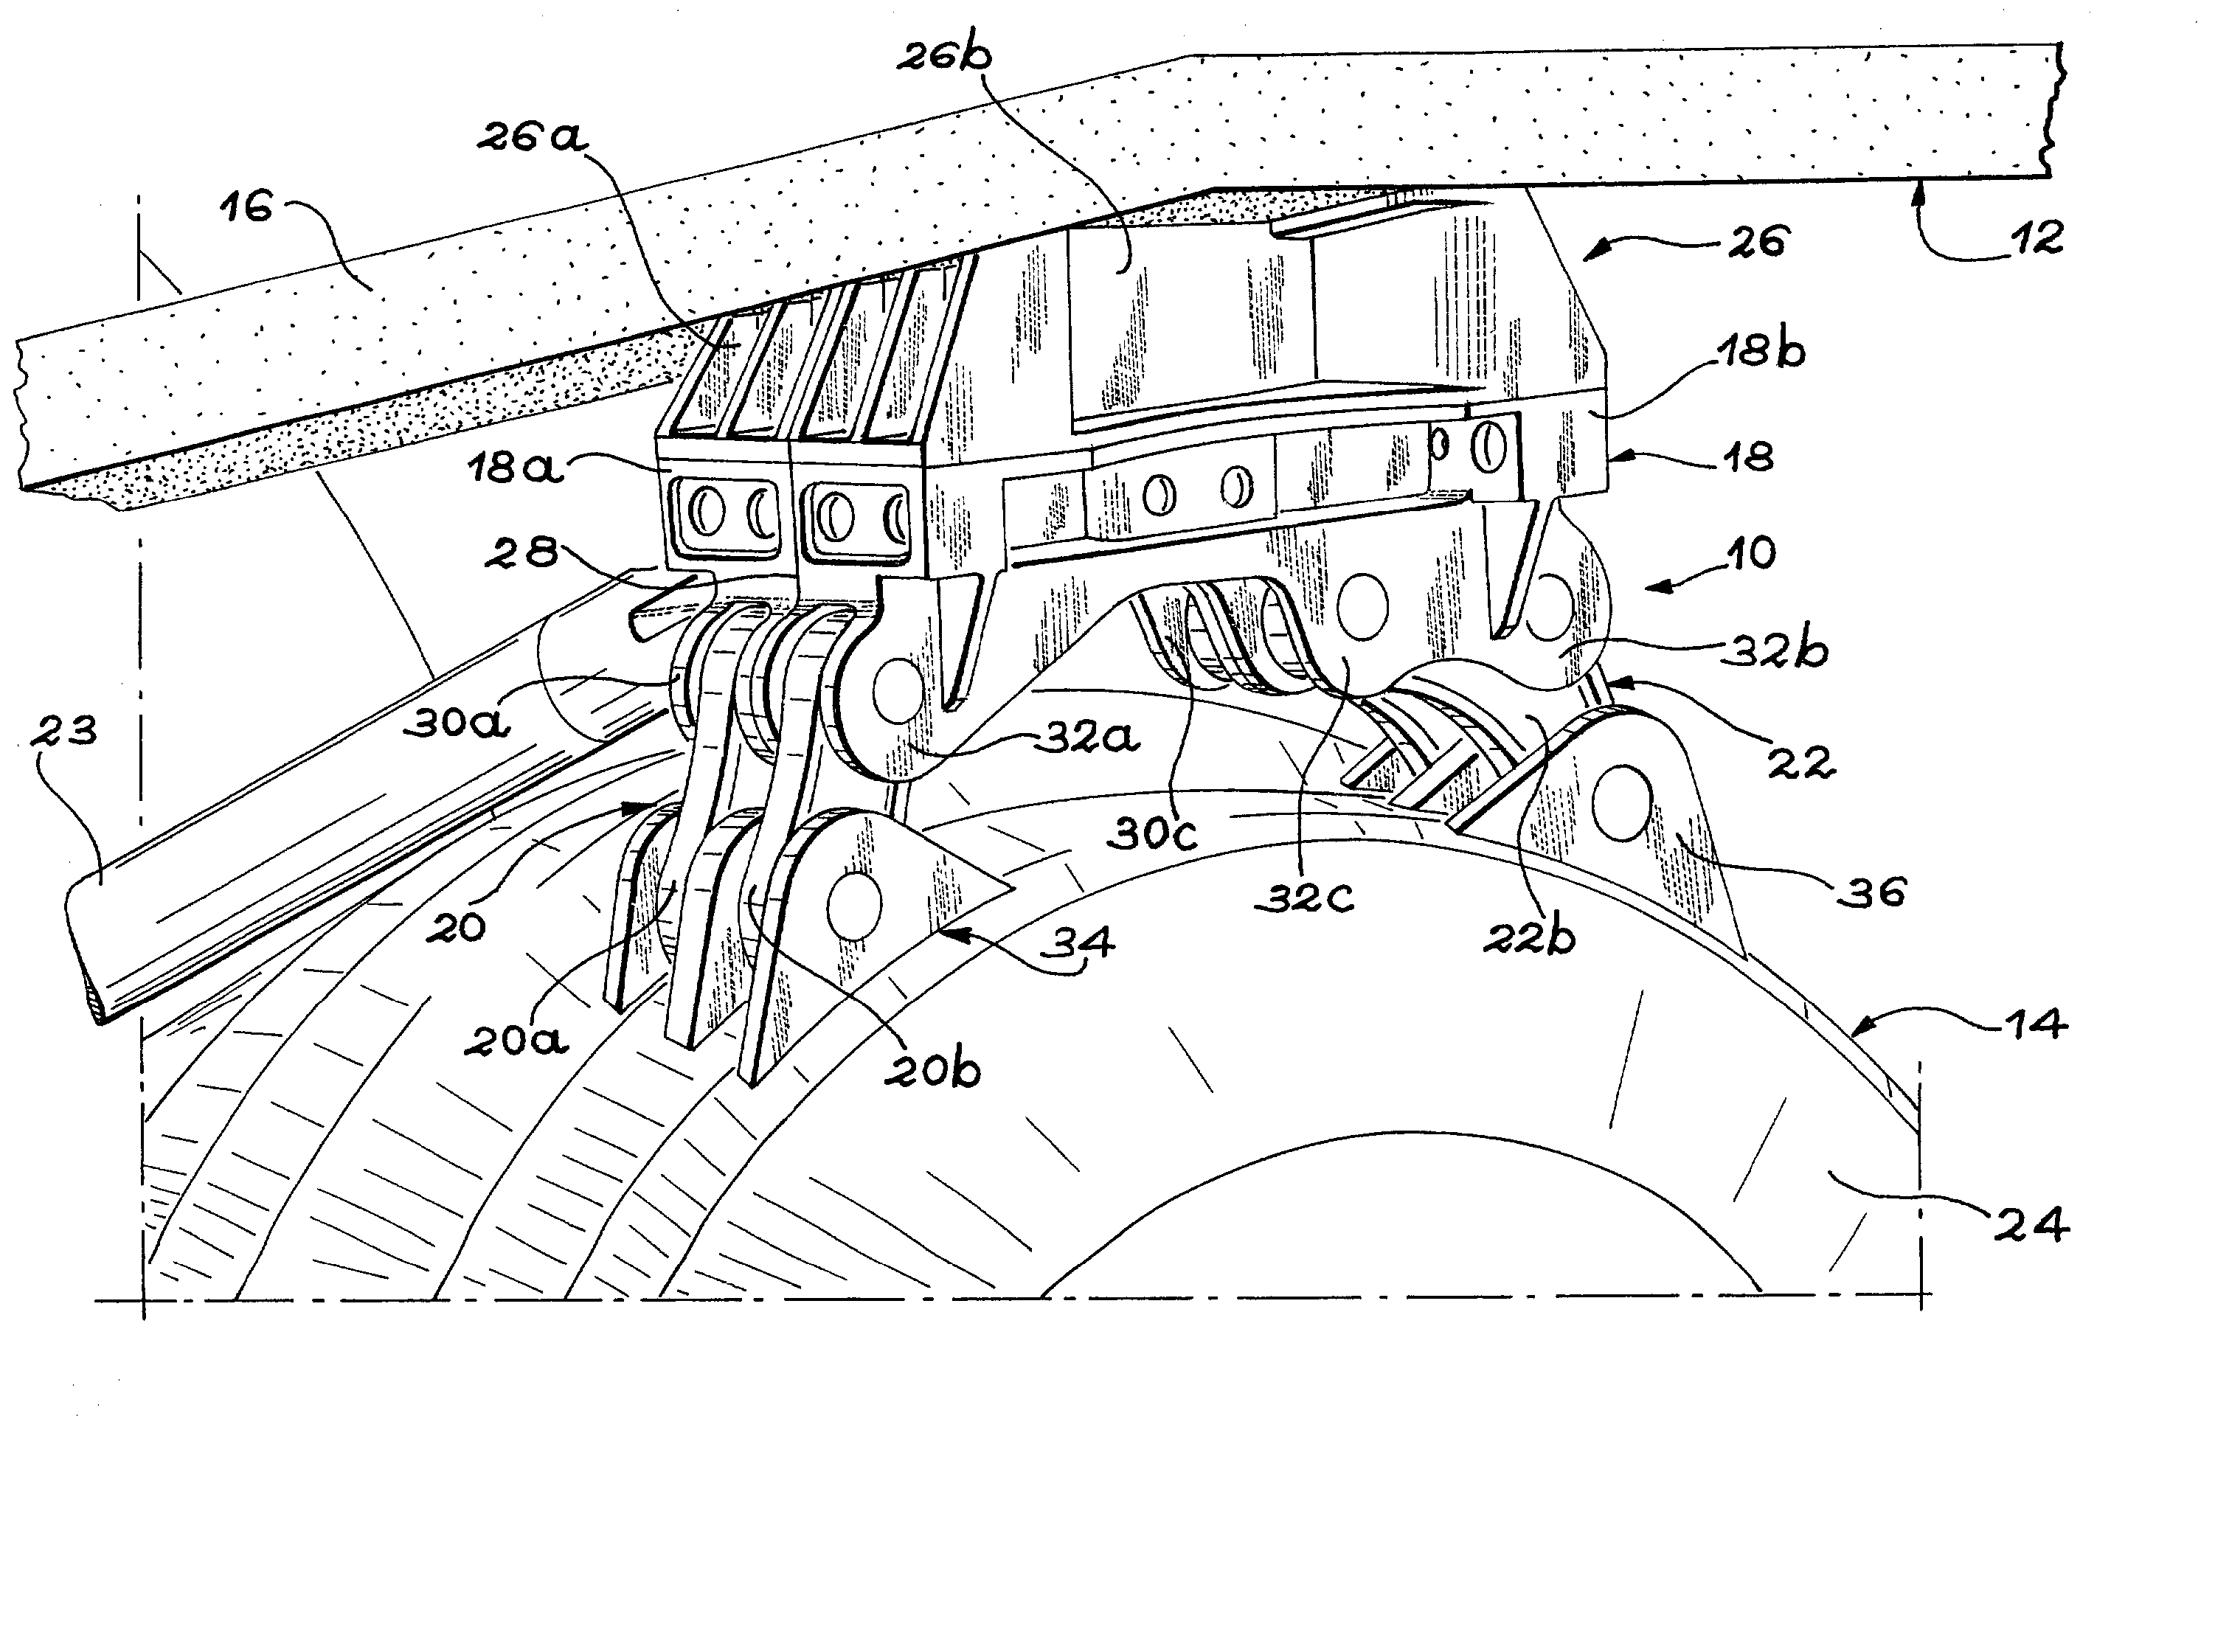 Device for the attachment of an engine to an aircraft